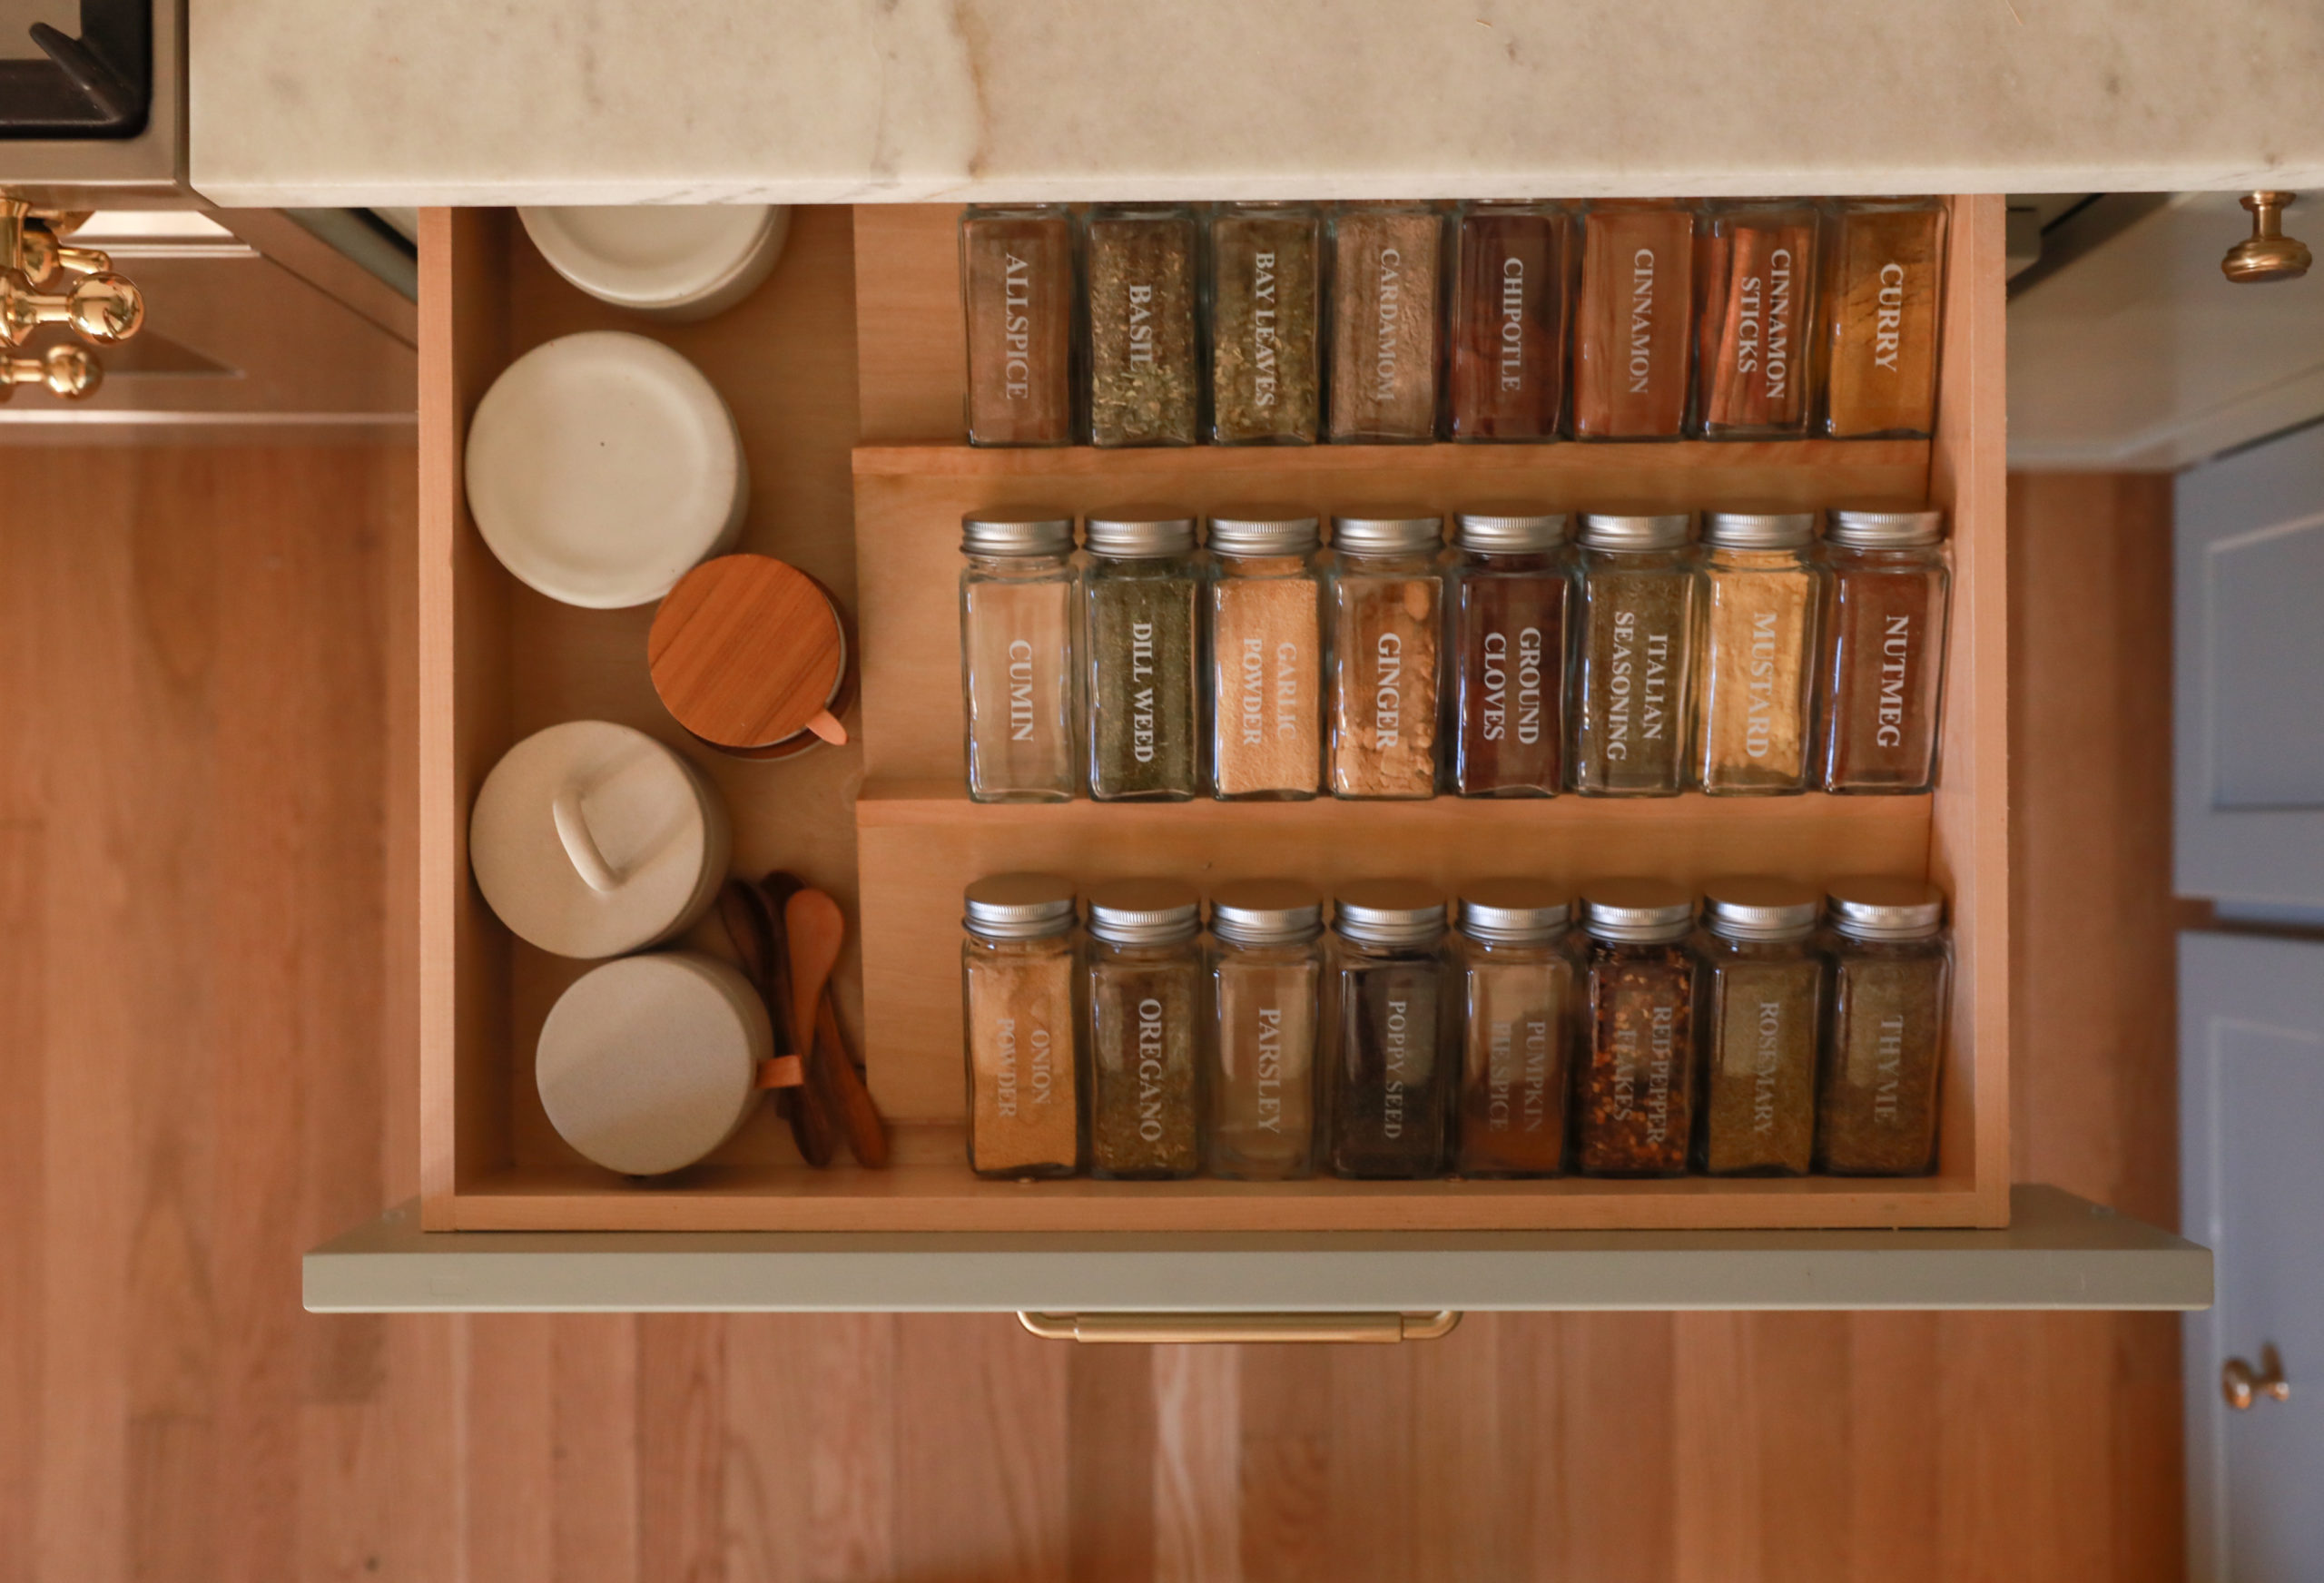 Duo Ventures: Organizing: The Spice Cabinet